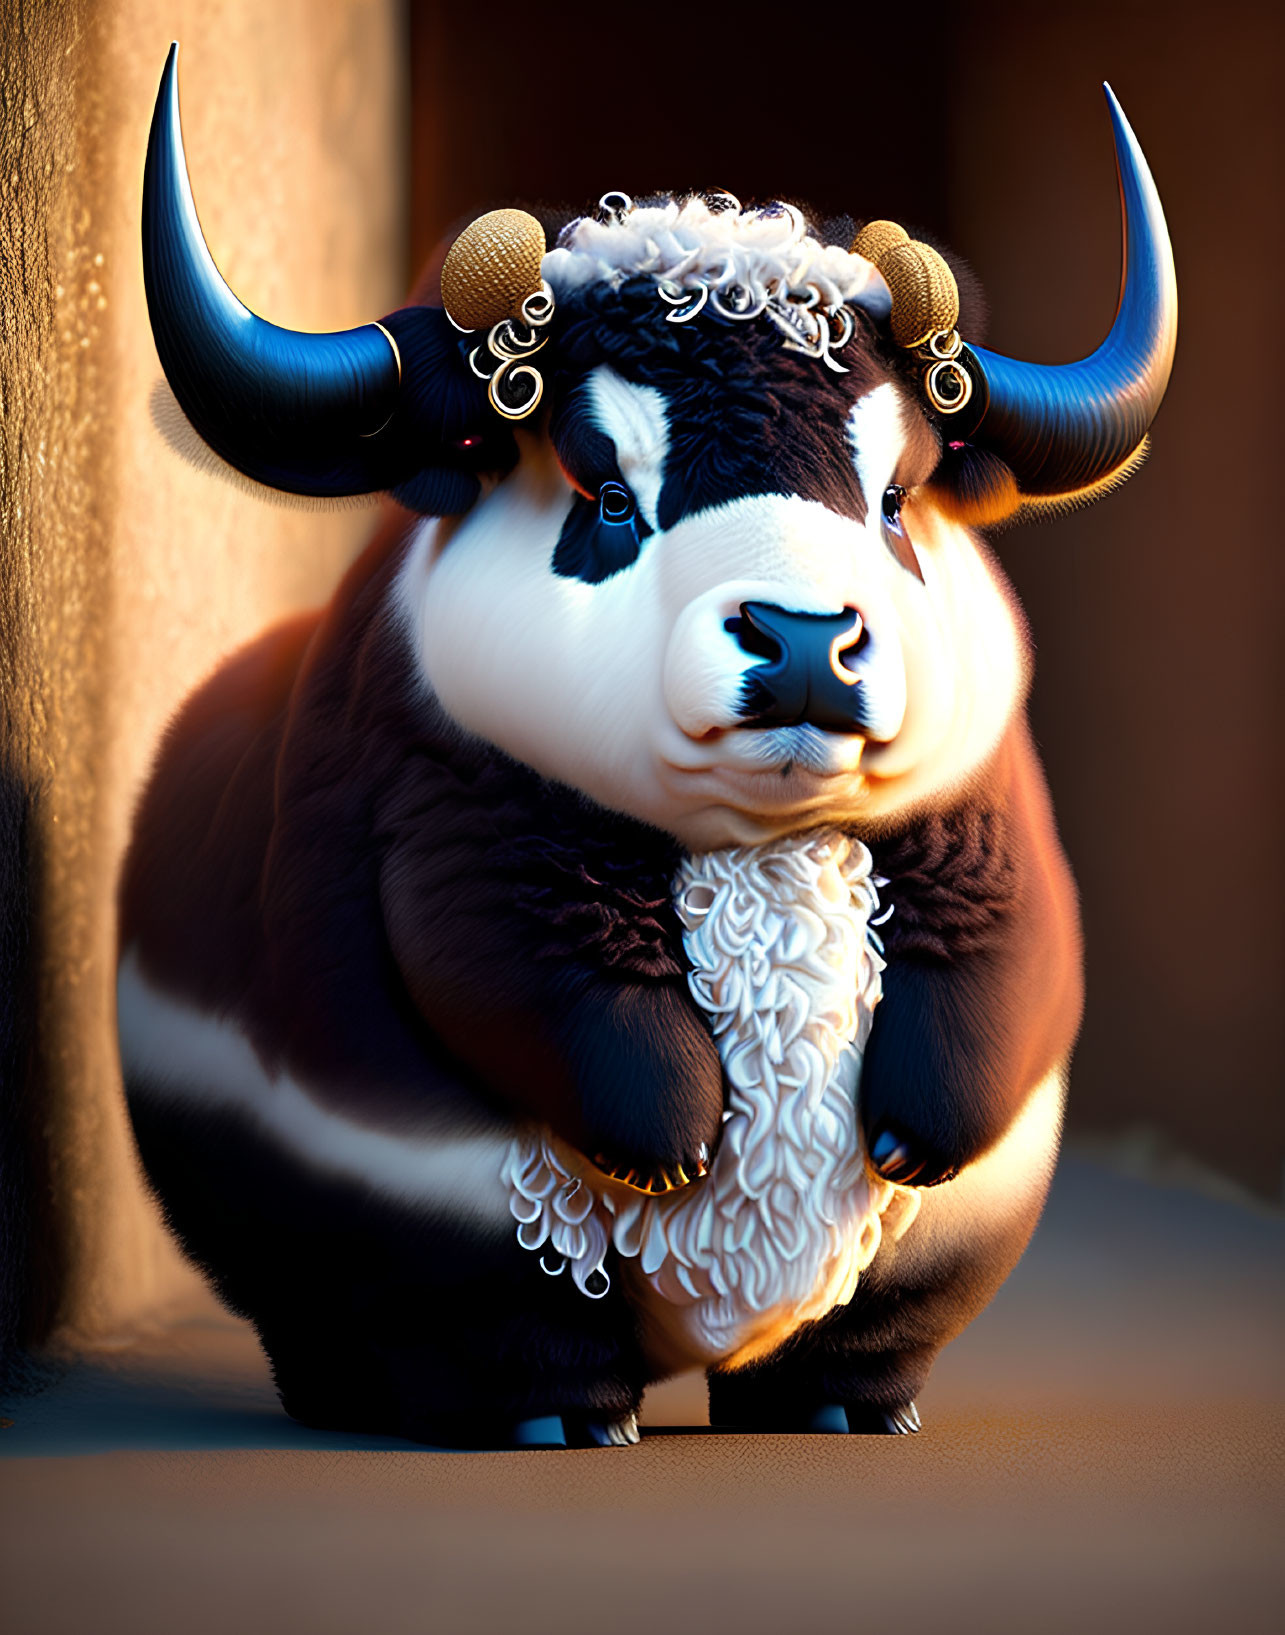 Muscular bull with large curved horns and white beard in warm light